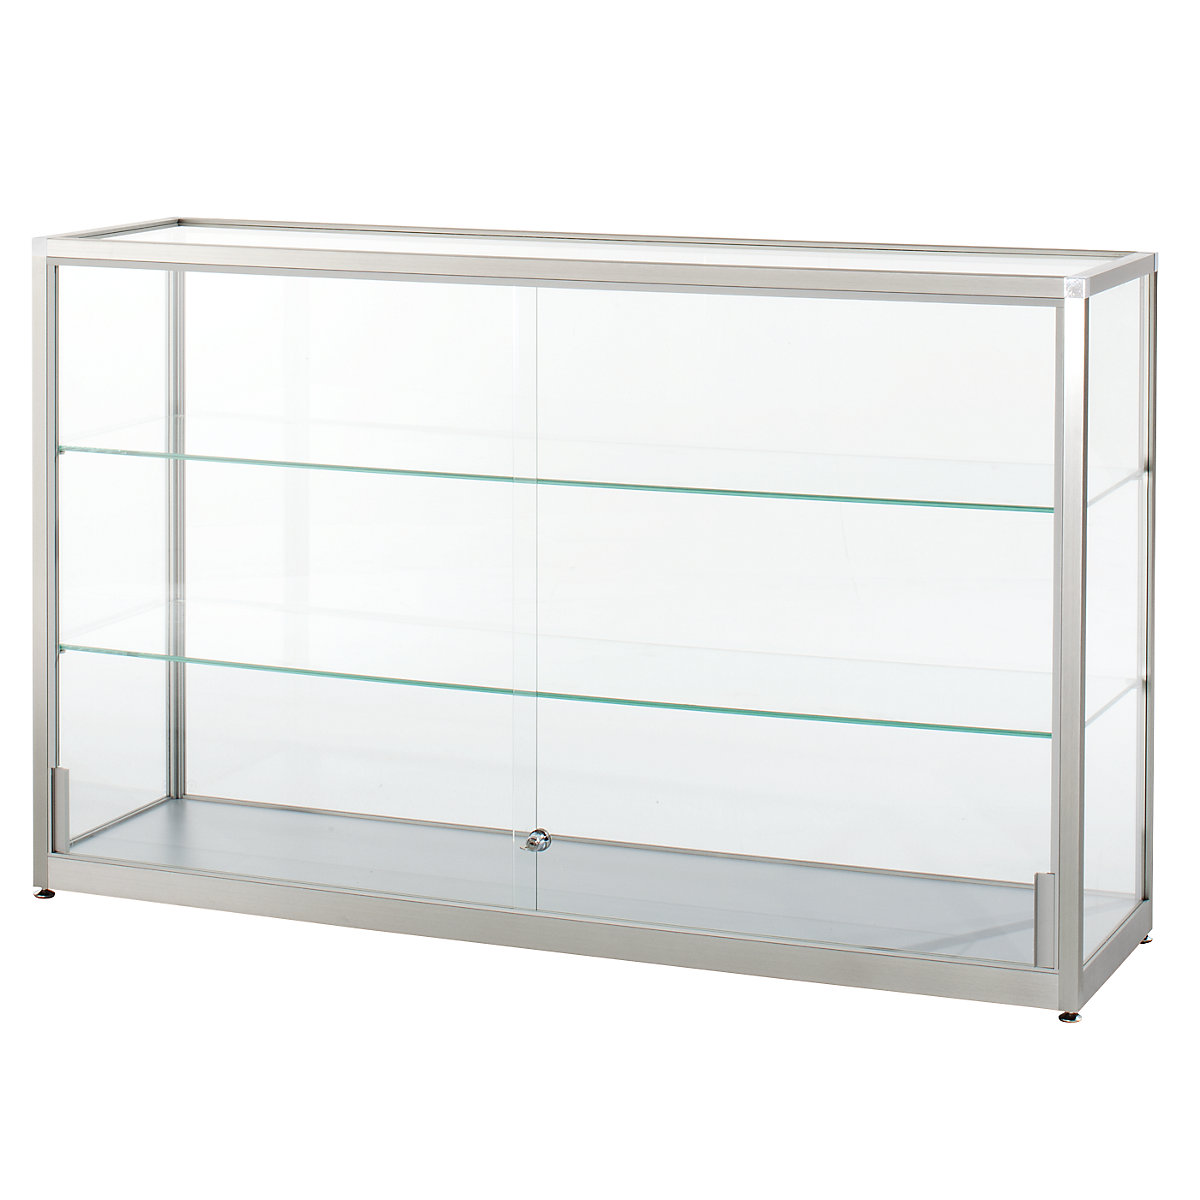 Half height glass cabinet, height 910 mm, 2 sliding doors, WxD 1500 x 400 mm, silver anodised-5